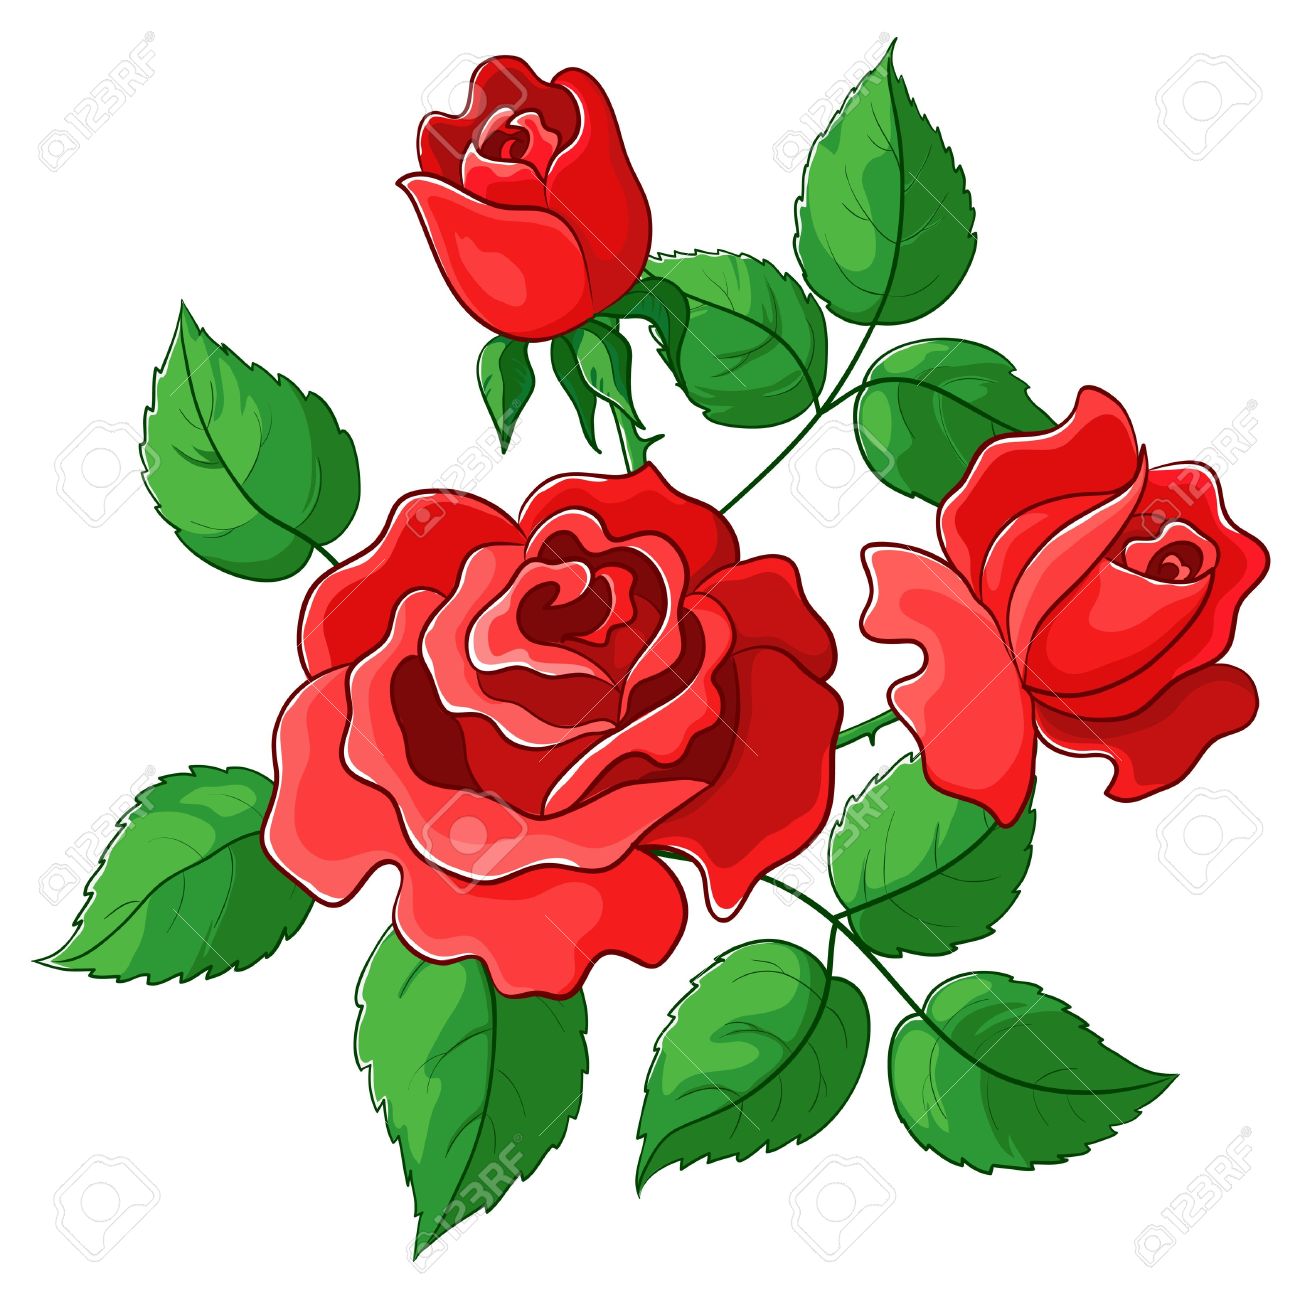 clipart red rose bud - photo #43